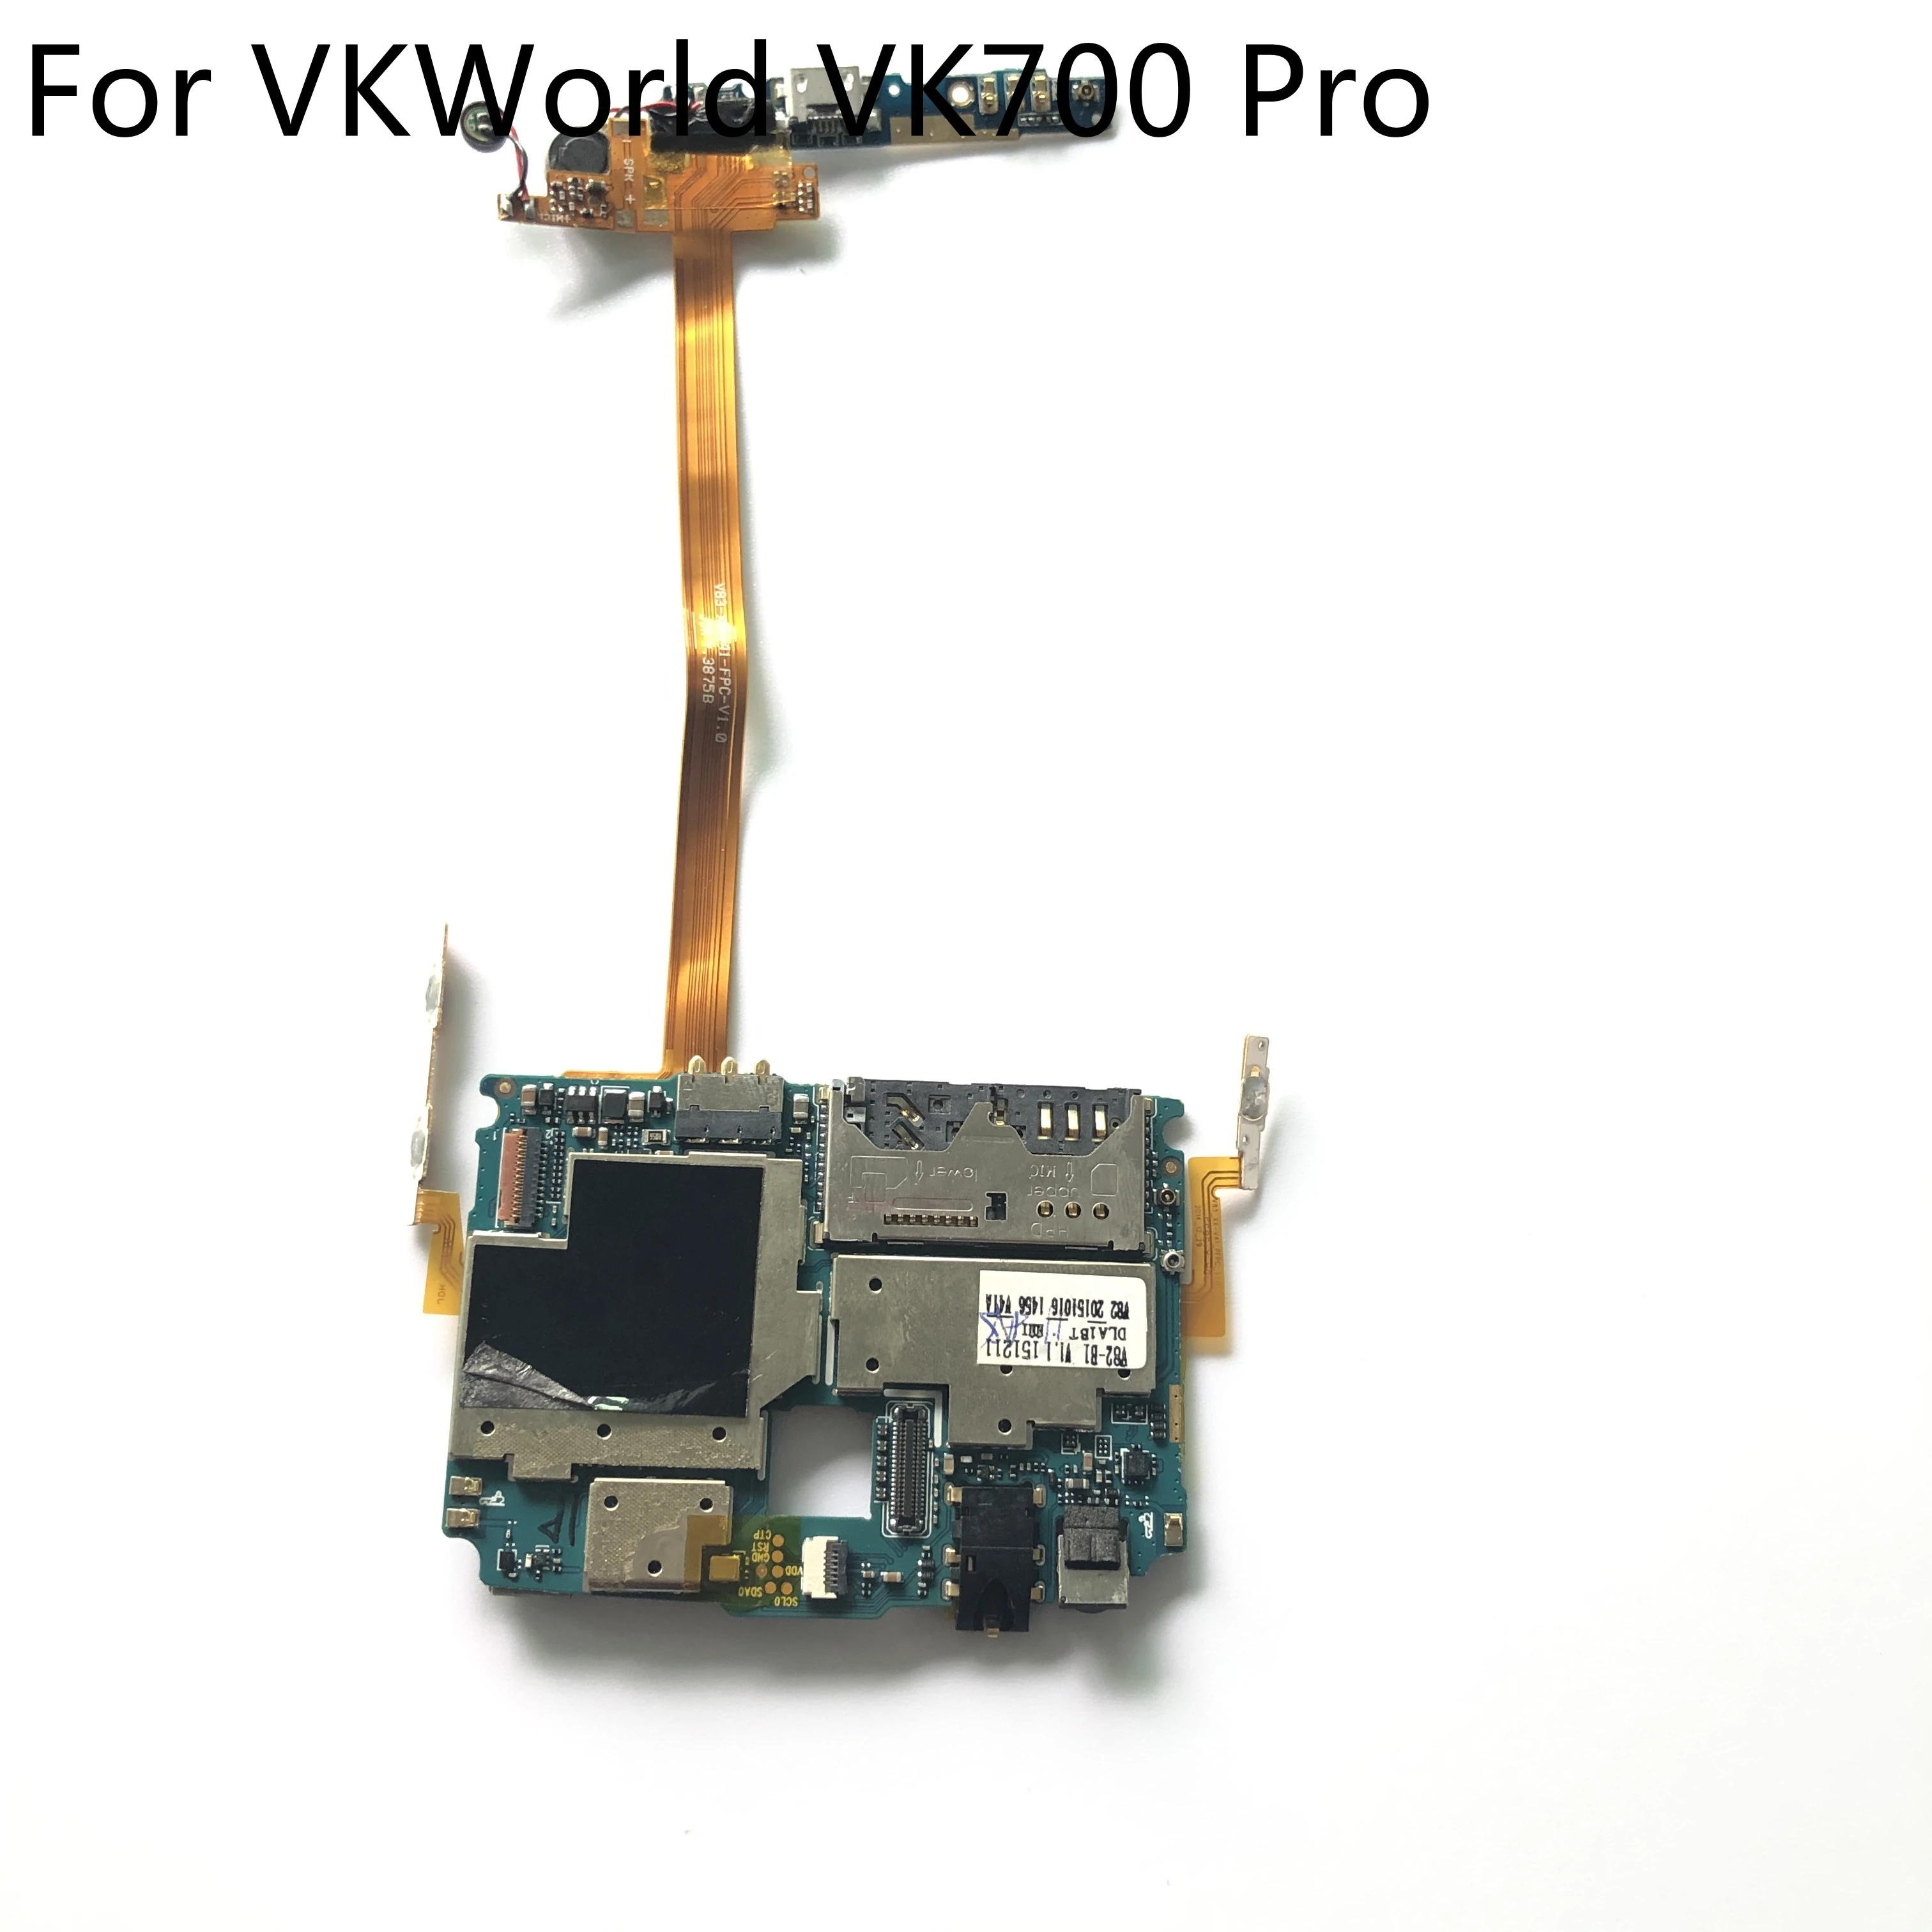 

Used Mainboard 1G RAM+8G ROM Motherboard for VKWorld VK700 Pro MTK6582 Quad Core 5.5 Inch HD 1280x720 Free Shipping